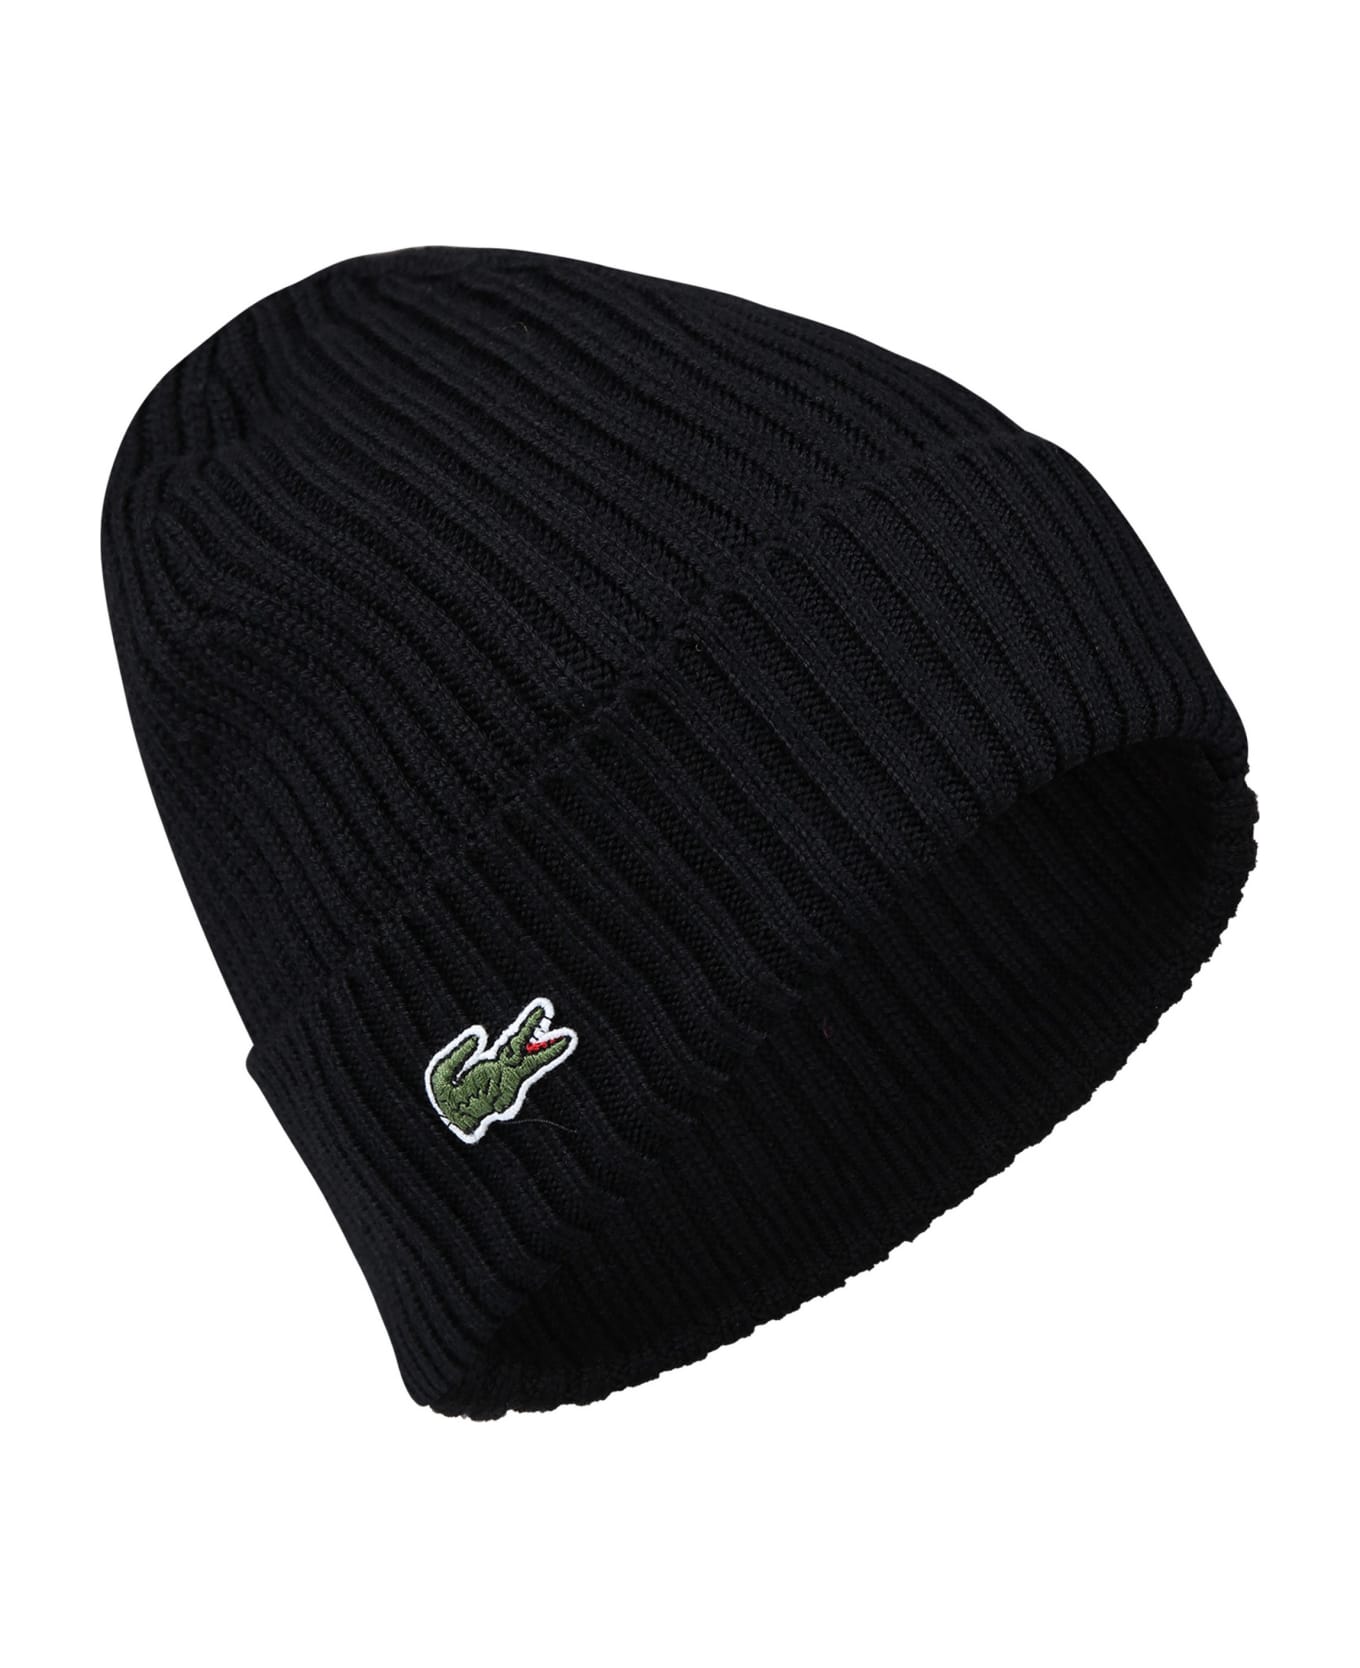 Lacoste Black Hat For Boy With Patch Of The Iconic Logo - Black